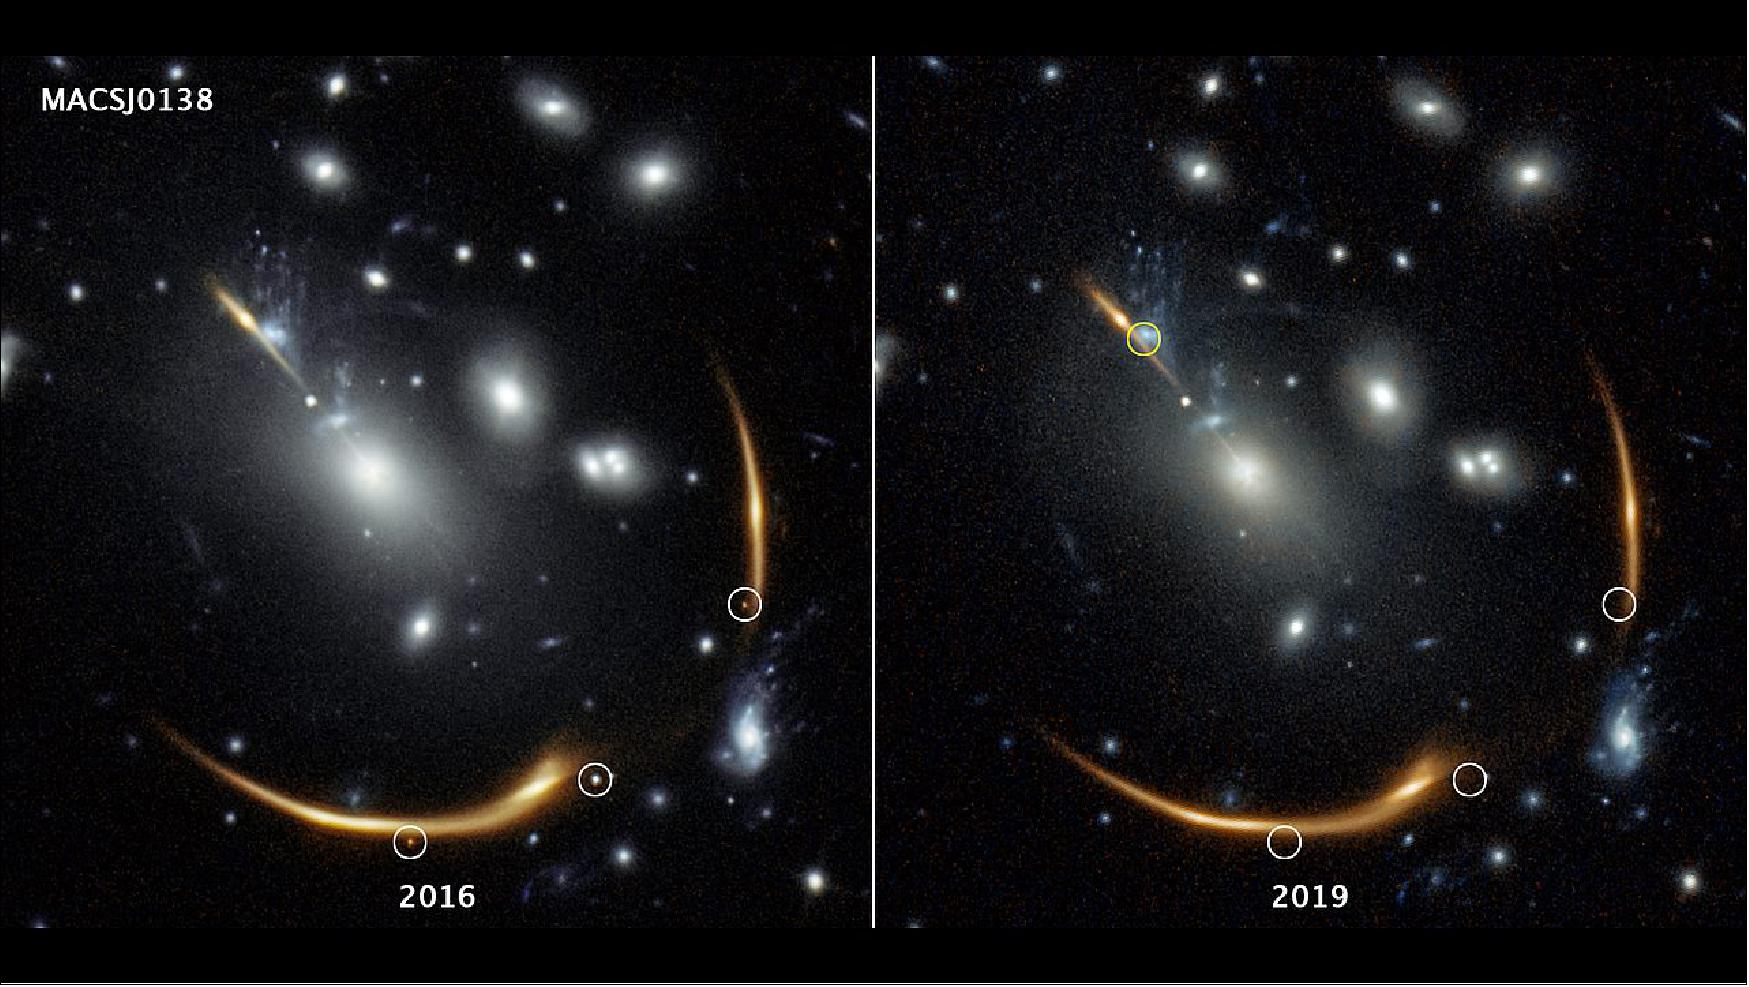 Figure 50: Three Times a Charm: Hubble Spots Three Images of a Distant Supernova. Now you see them, now you don't. - Three views of the same supernova appear in the 2016 image on the left, taken by the Hubble Space Telescope. But they're gone in the 2019 image. The distant supernova, named Requiem, is embedded in the giant galaxy cluster MACS J0138. The cluster is so massive that its powerful gravity bends and magnifies the light from the supernova, located in a galaxy far behind it. Called gravitational lensing, this phenomenon also splits the supernova's light into multiple mirror images, highlighted by the white circles in the 2016 image.- The multiply imaged supernova disappears in the 2019 image of the same cluster, at right. The snapshot, taken in 2019, helped astronomers confirm the object's pedigree. Supernovae explode and fade away over time. Researchers predict that a rerun of the same supernova will make an appearance in 2037. The predicted location of that fourth image is highlighted by the yellow circle at top left. - The light from Supernova Requiem needed an estimated 10 billion years for its journey, based on the distance of its host galaxy. The light that Hubble captured from the cluster, MACS J0138.0-2155, took about 4 billion years to reach Earth. - The images were taken in near-infrared light by Hubble's Wide Field Camera 3 [image credits: LEAD AUTHOR: Steve A. Rodney (University of South Carolina), Gabriel Brammer (Cosmic Dawn Center/Niels Bohr Institute/University of Copenhagen), IMAGE PROCESSING: Joseph DePasquale (STScI)]